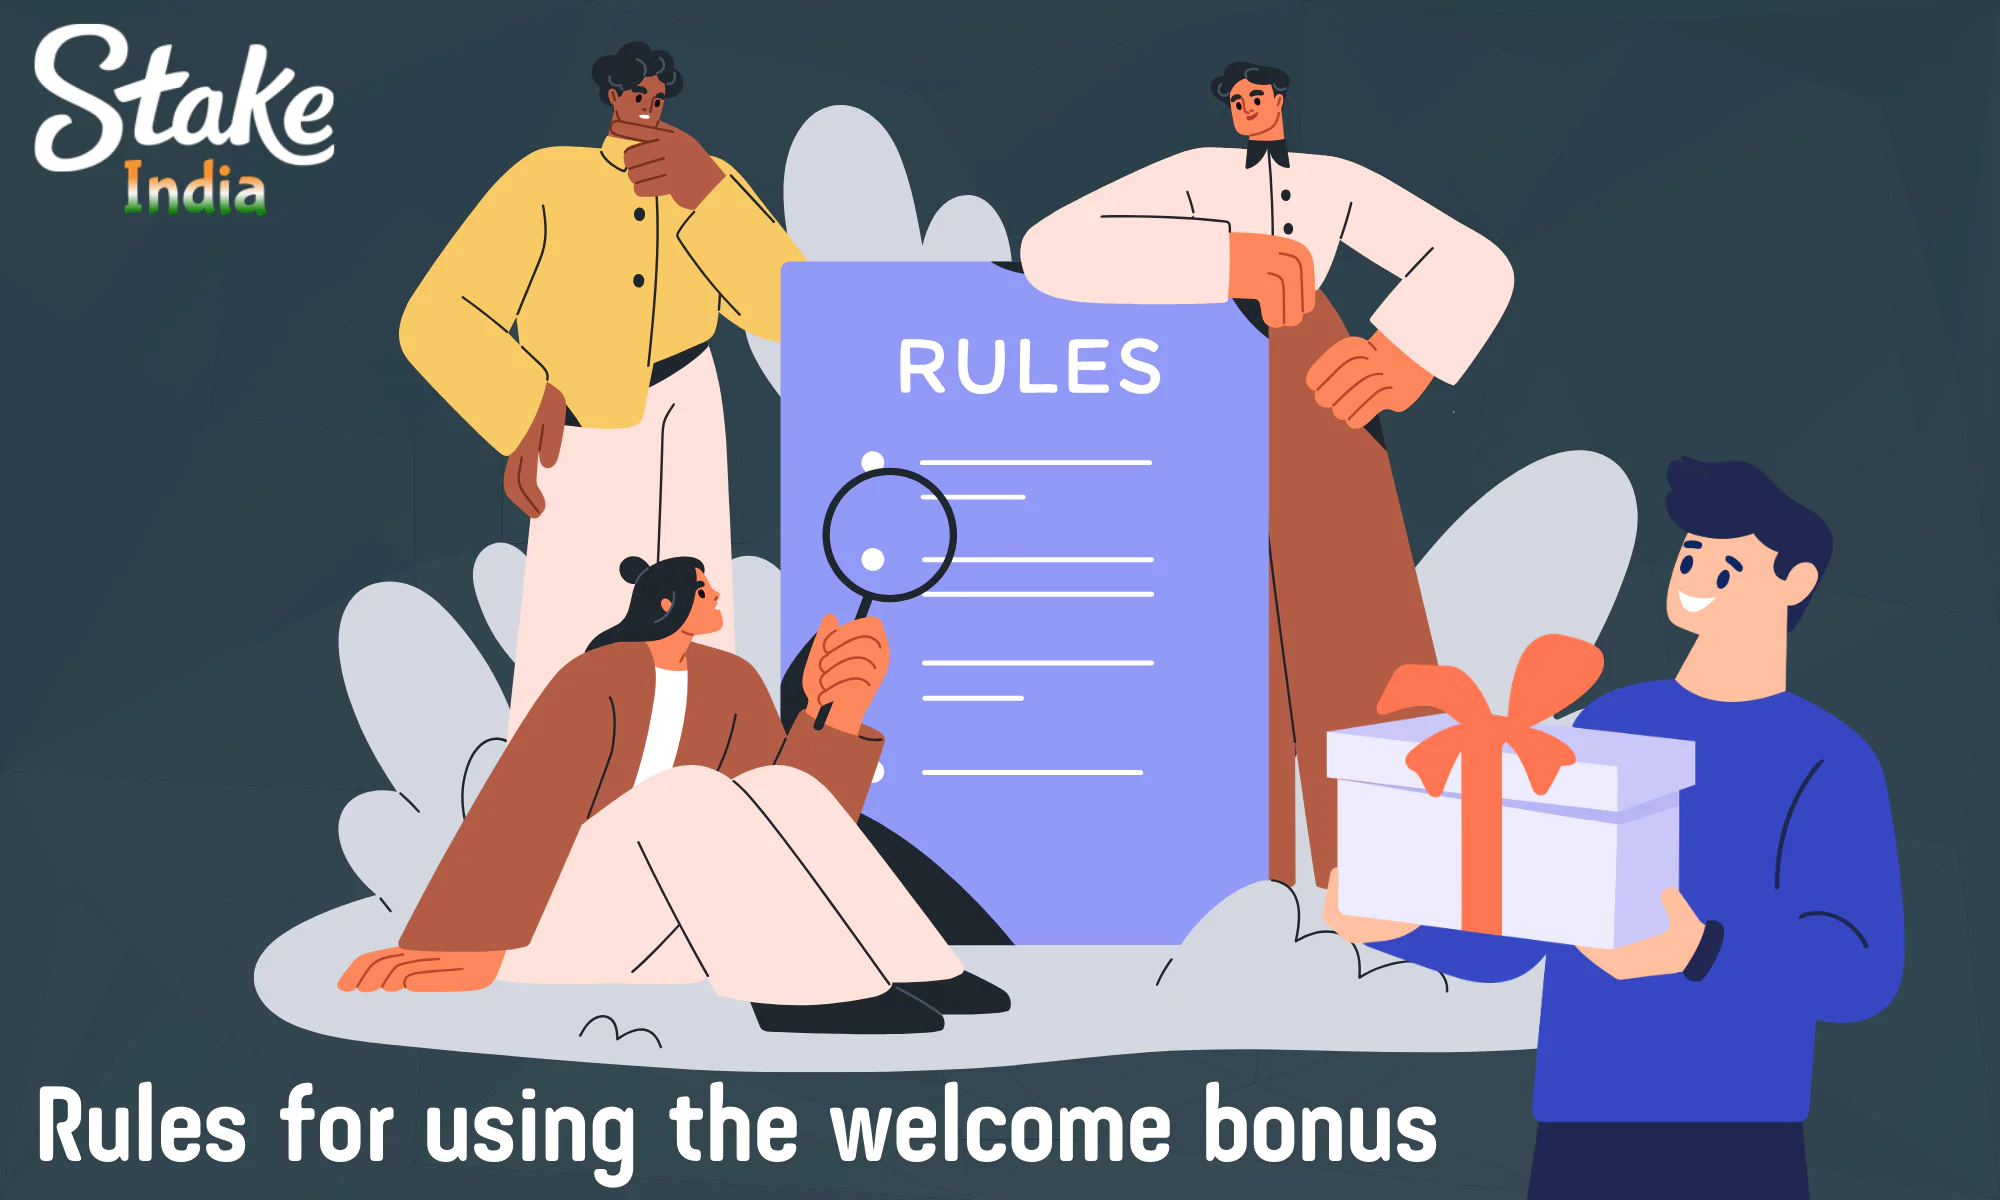 Basic rules for using welcome bonuses at Stake